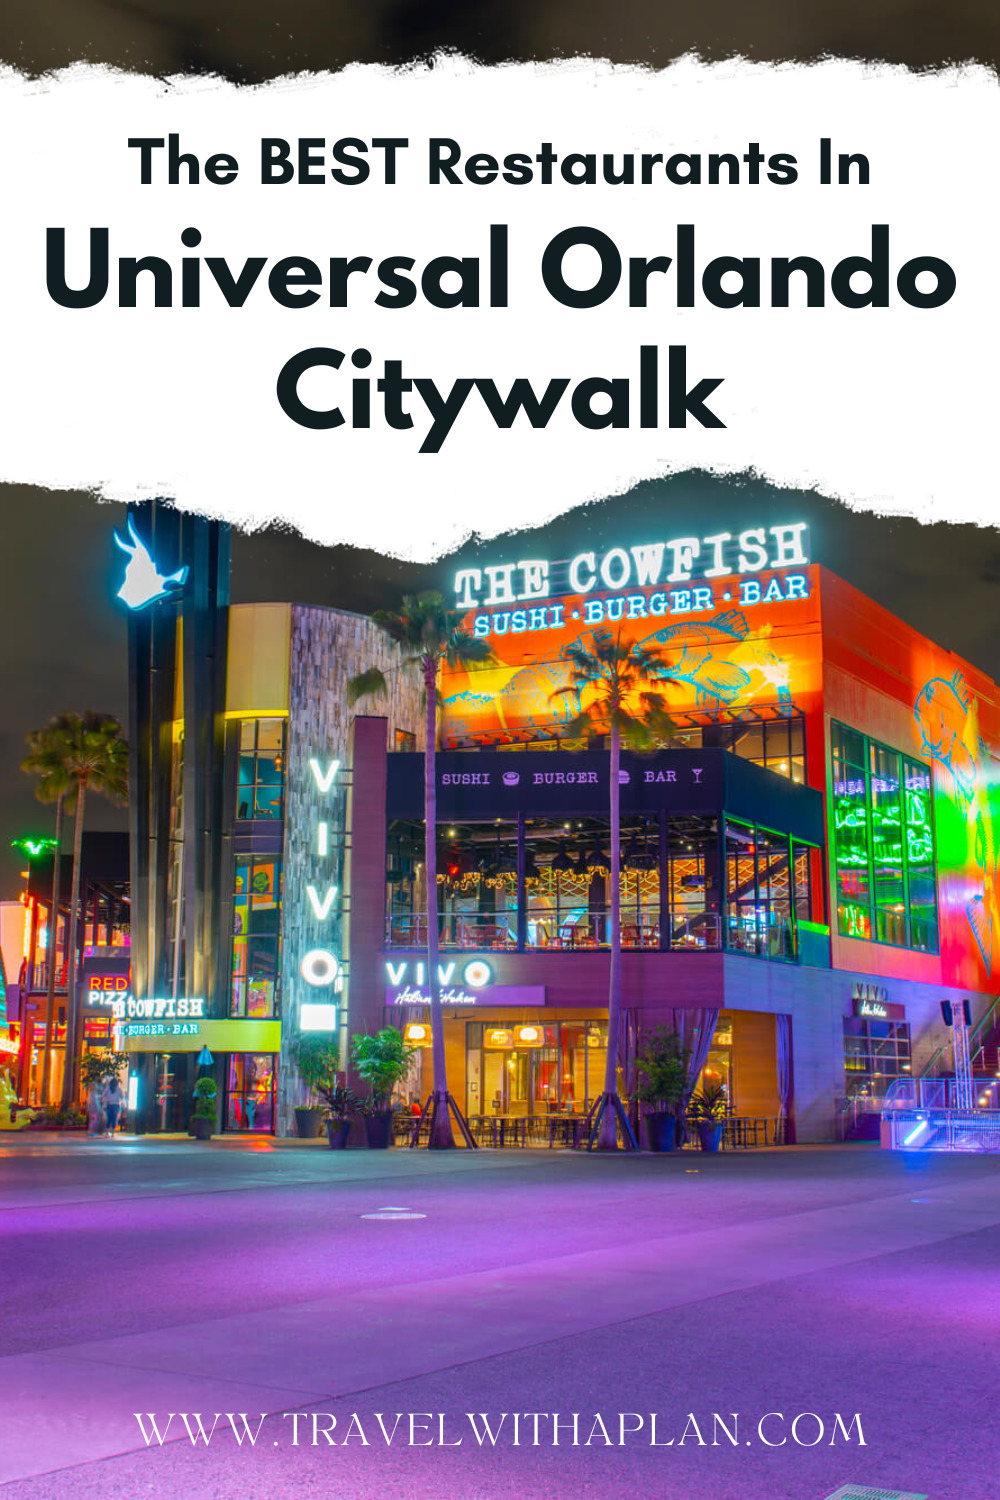 Check out our list of the absolute best restaurants in Universal Orlando Citywalk!